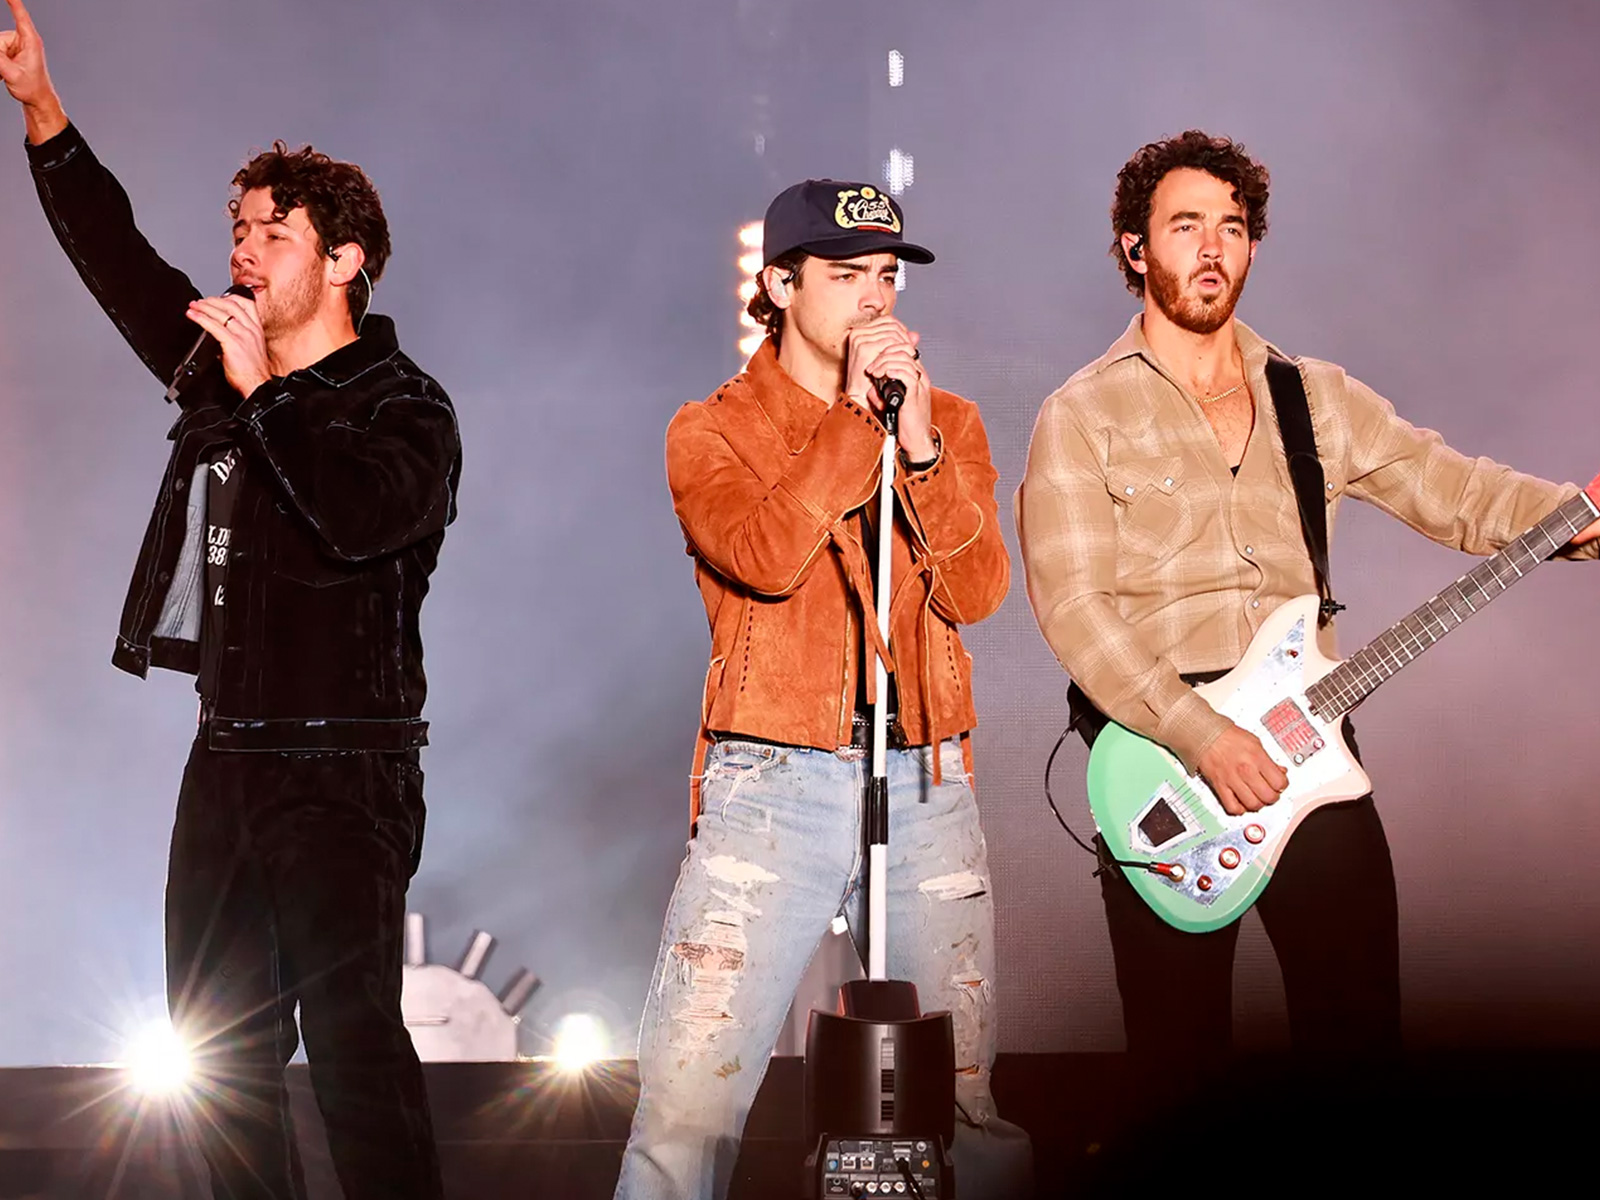 The Jonas Brothers stir up their fan club with exclusive ice creams